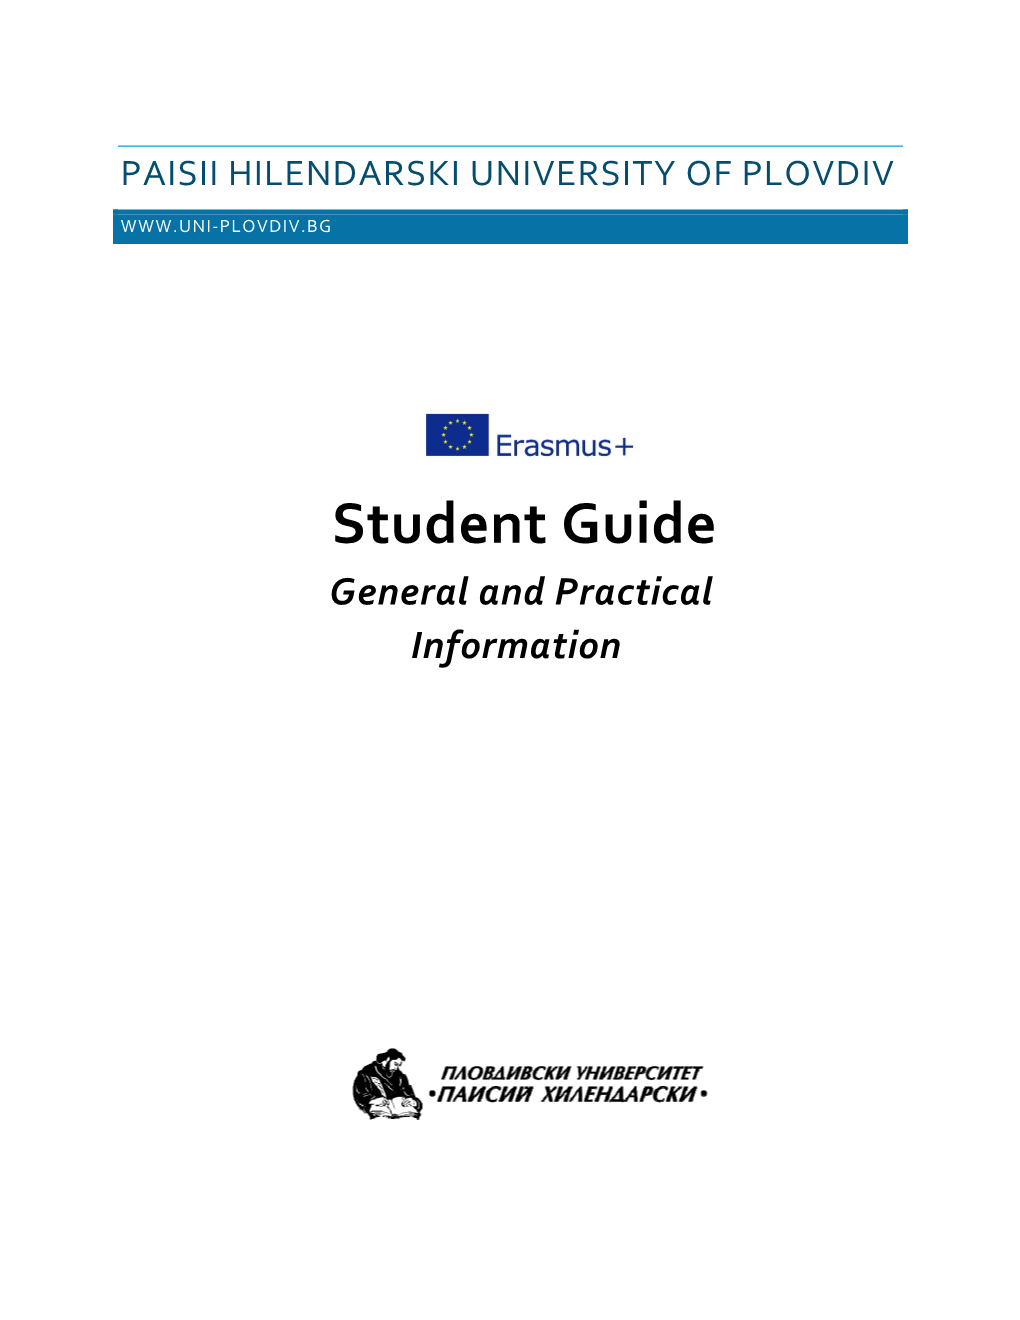 Student Guide General and Practical Information